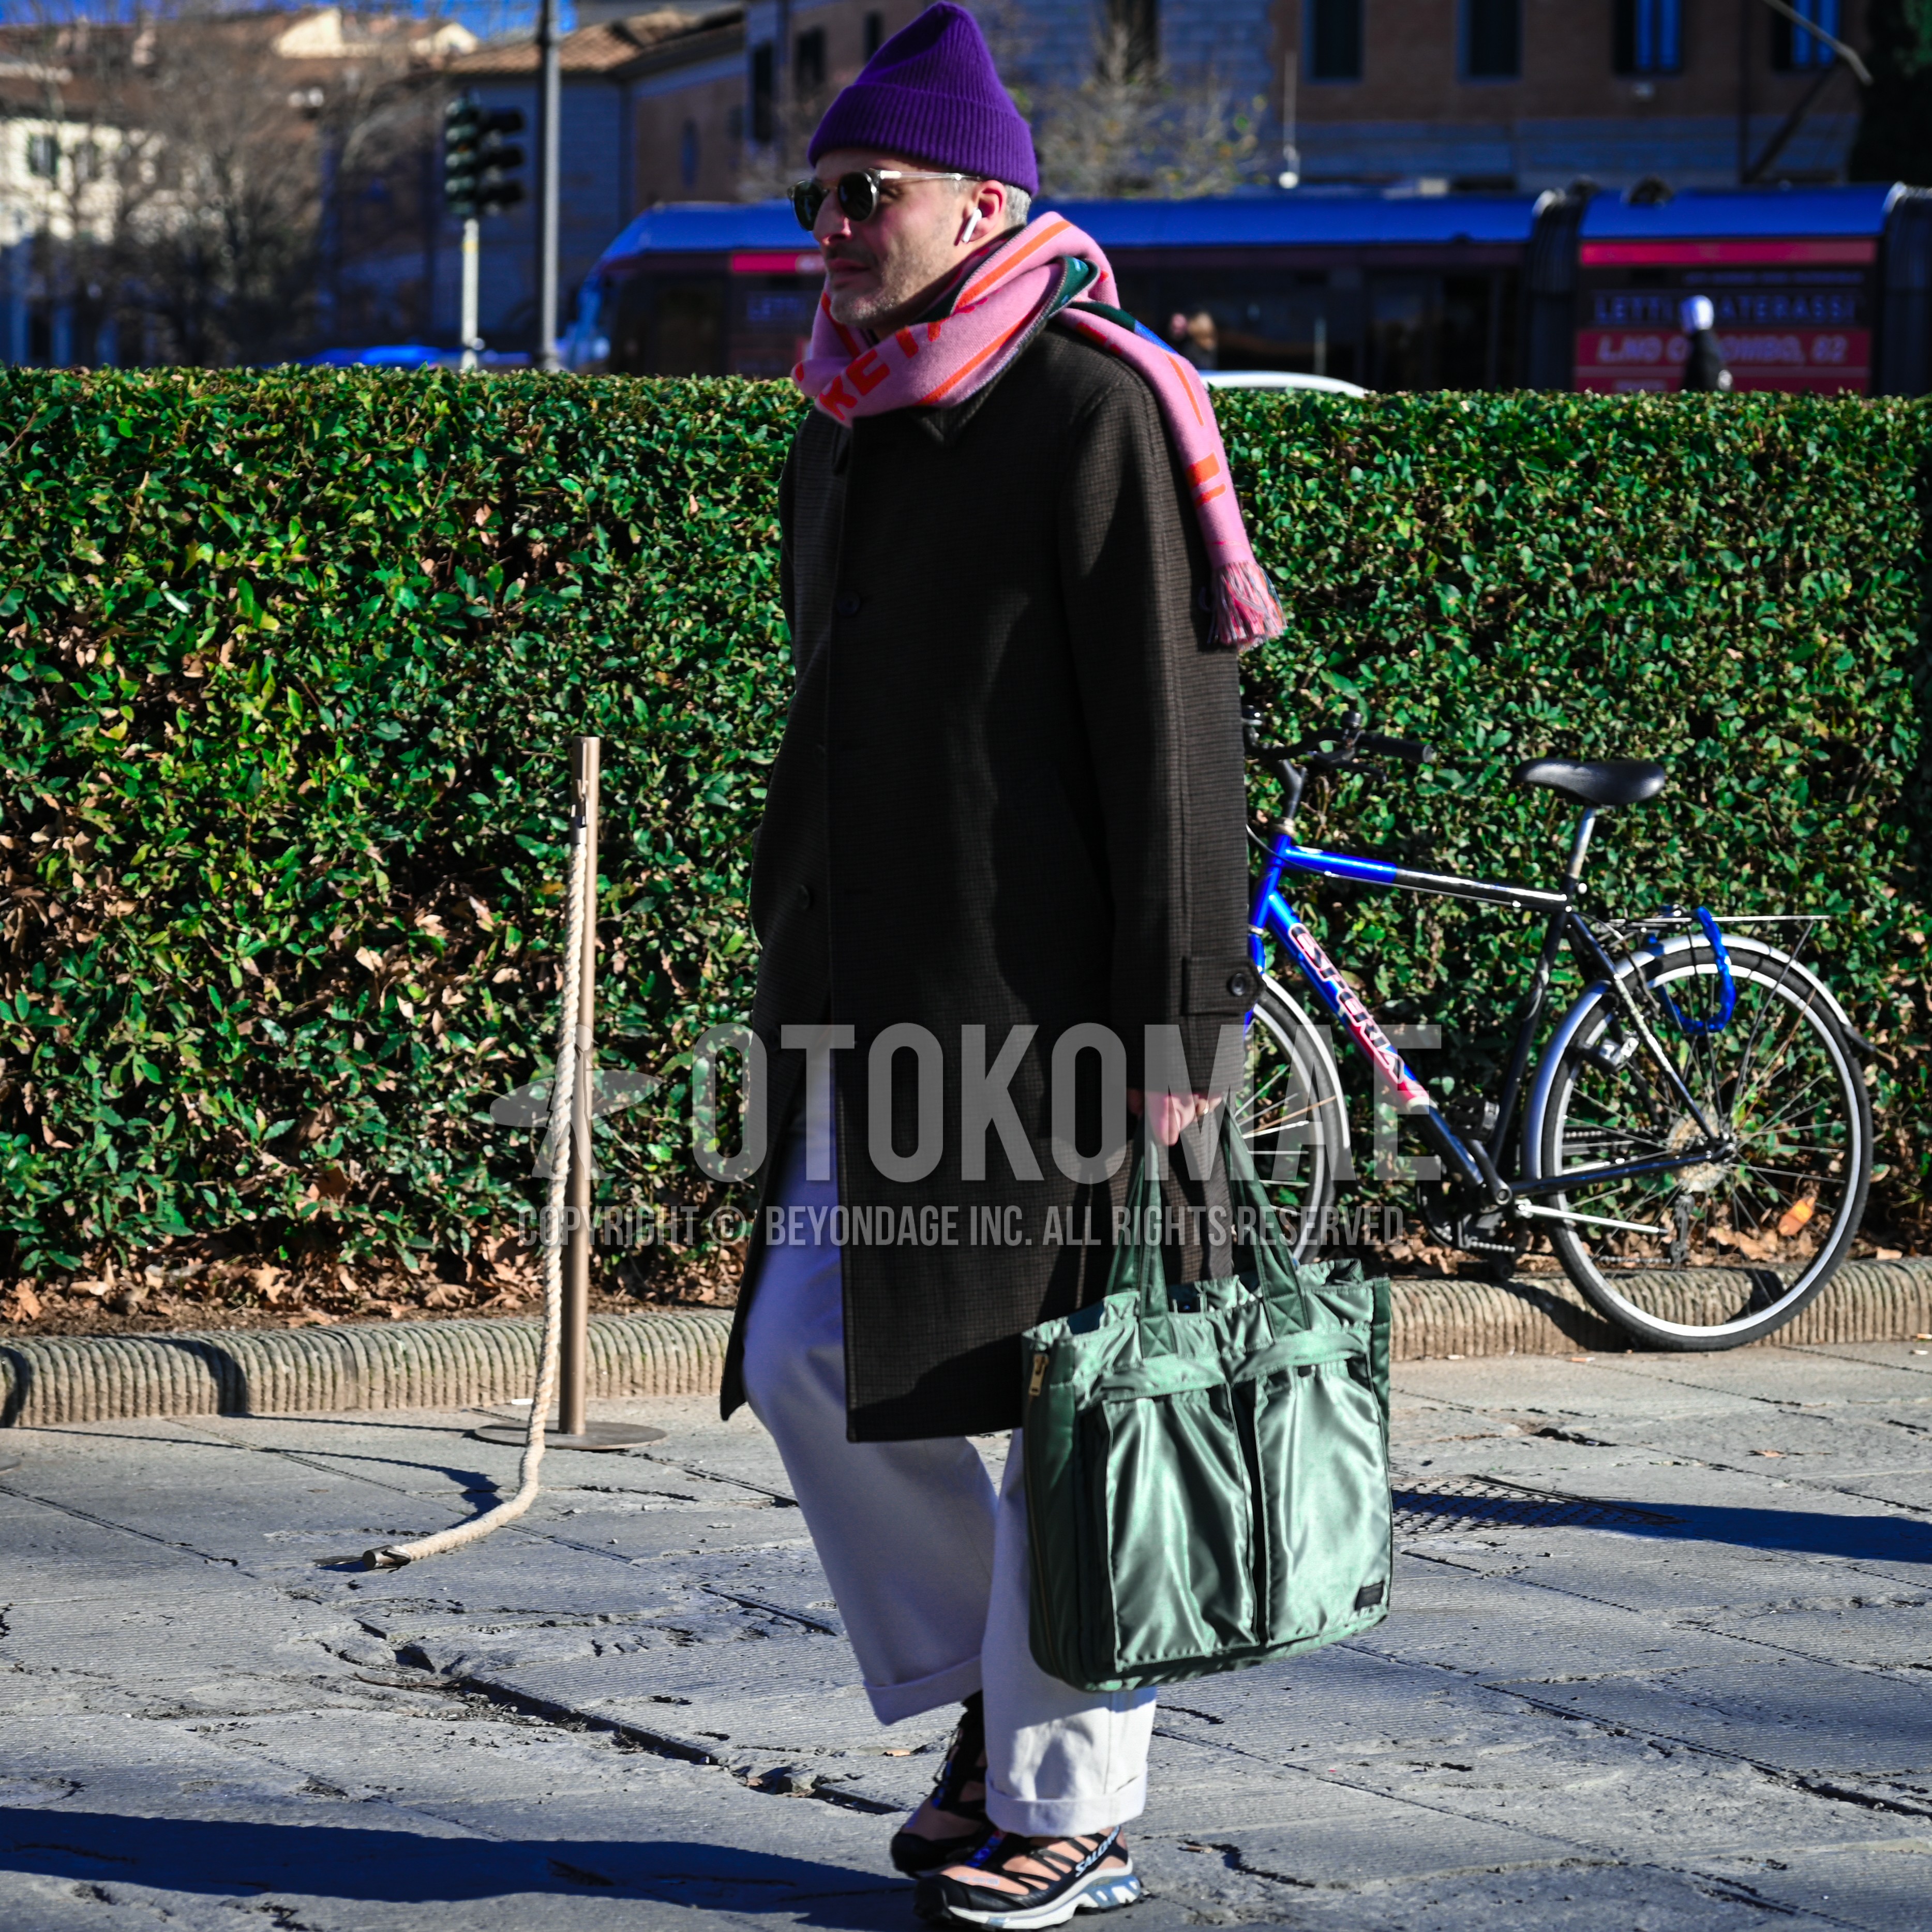 Men's autumn winter outfit with purple plain knit cap, clear plain sunglasses, pink whole pattern scarf, brown check stenkarrer coat, white plain chinos, orange low-cut sneakers, green one point briefcase/handbag.